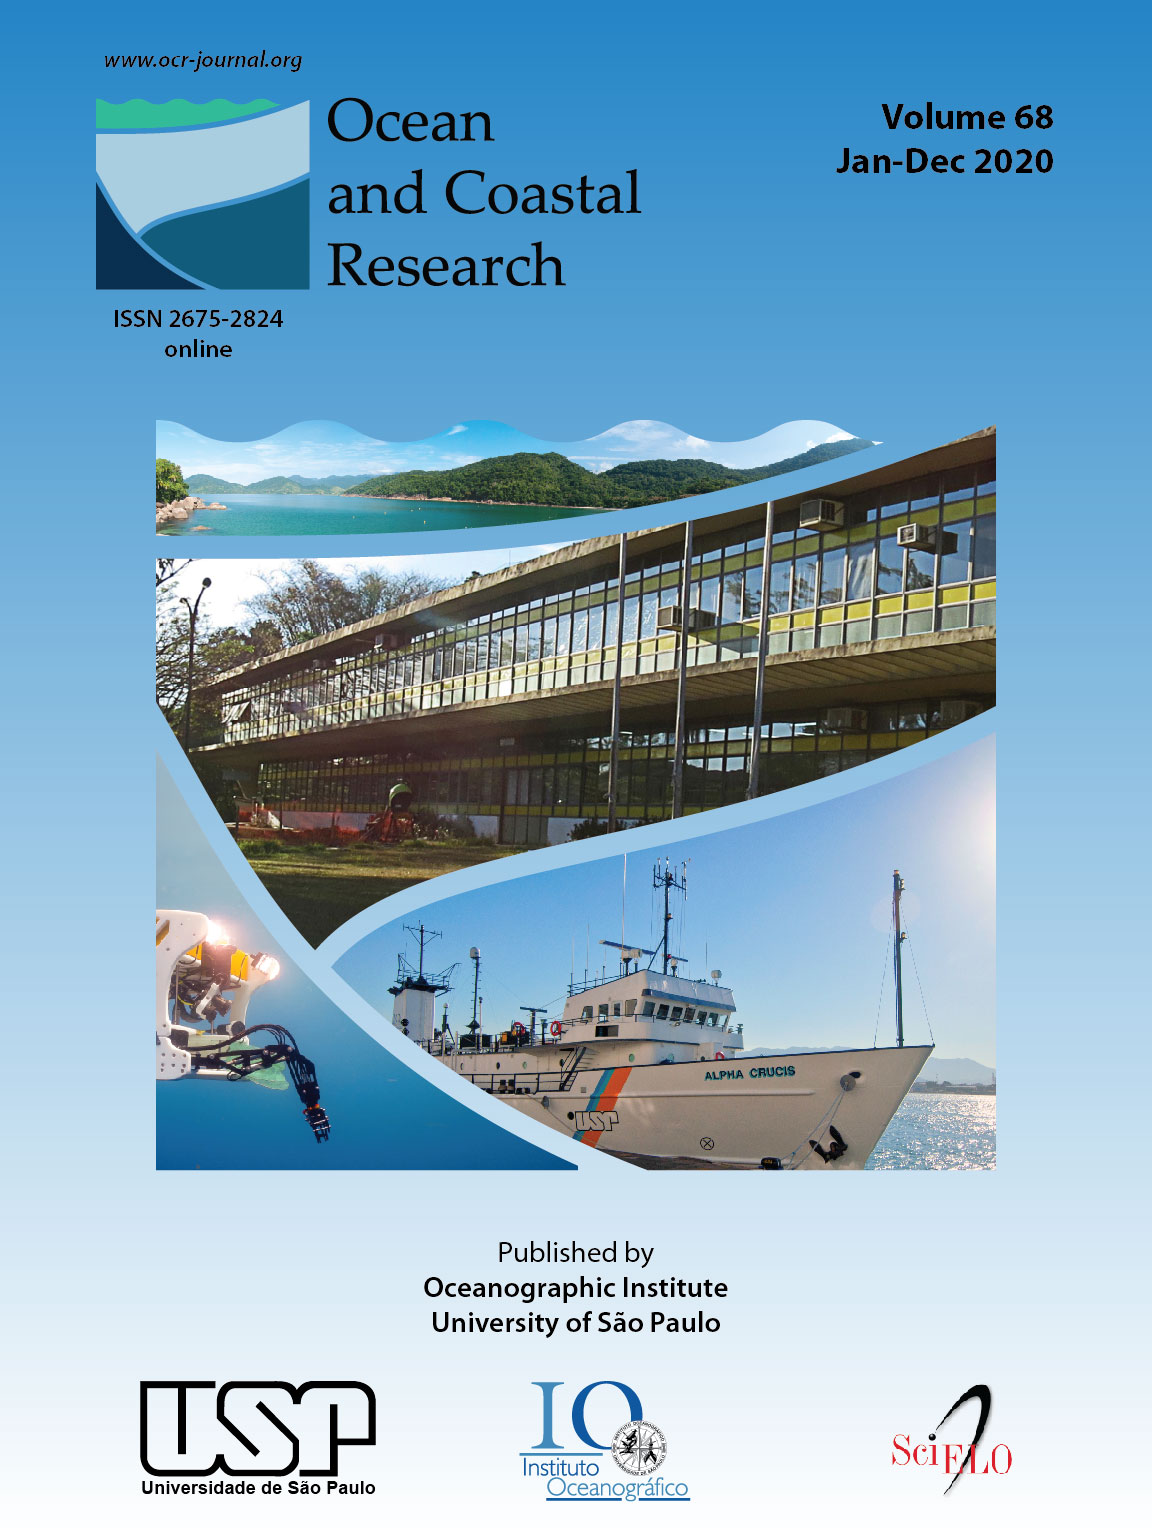 Ocean and Coastal Research 2020 -  Volume 68